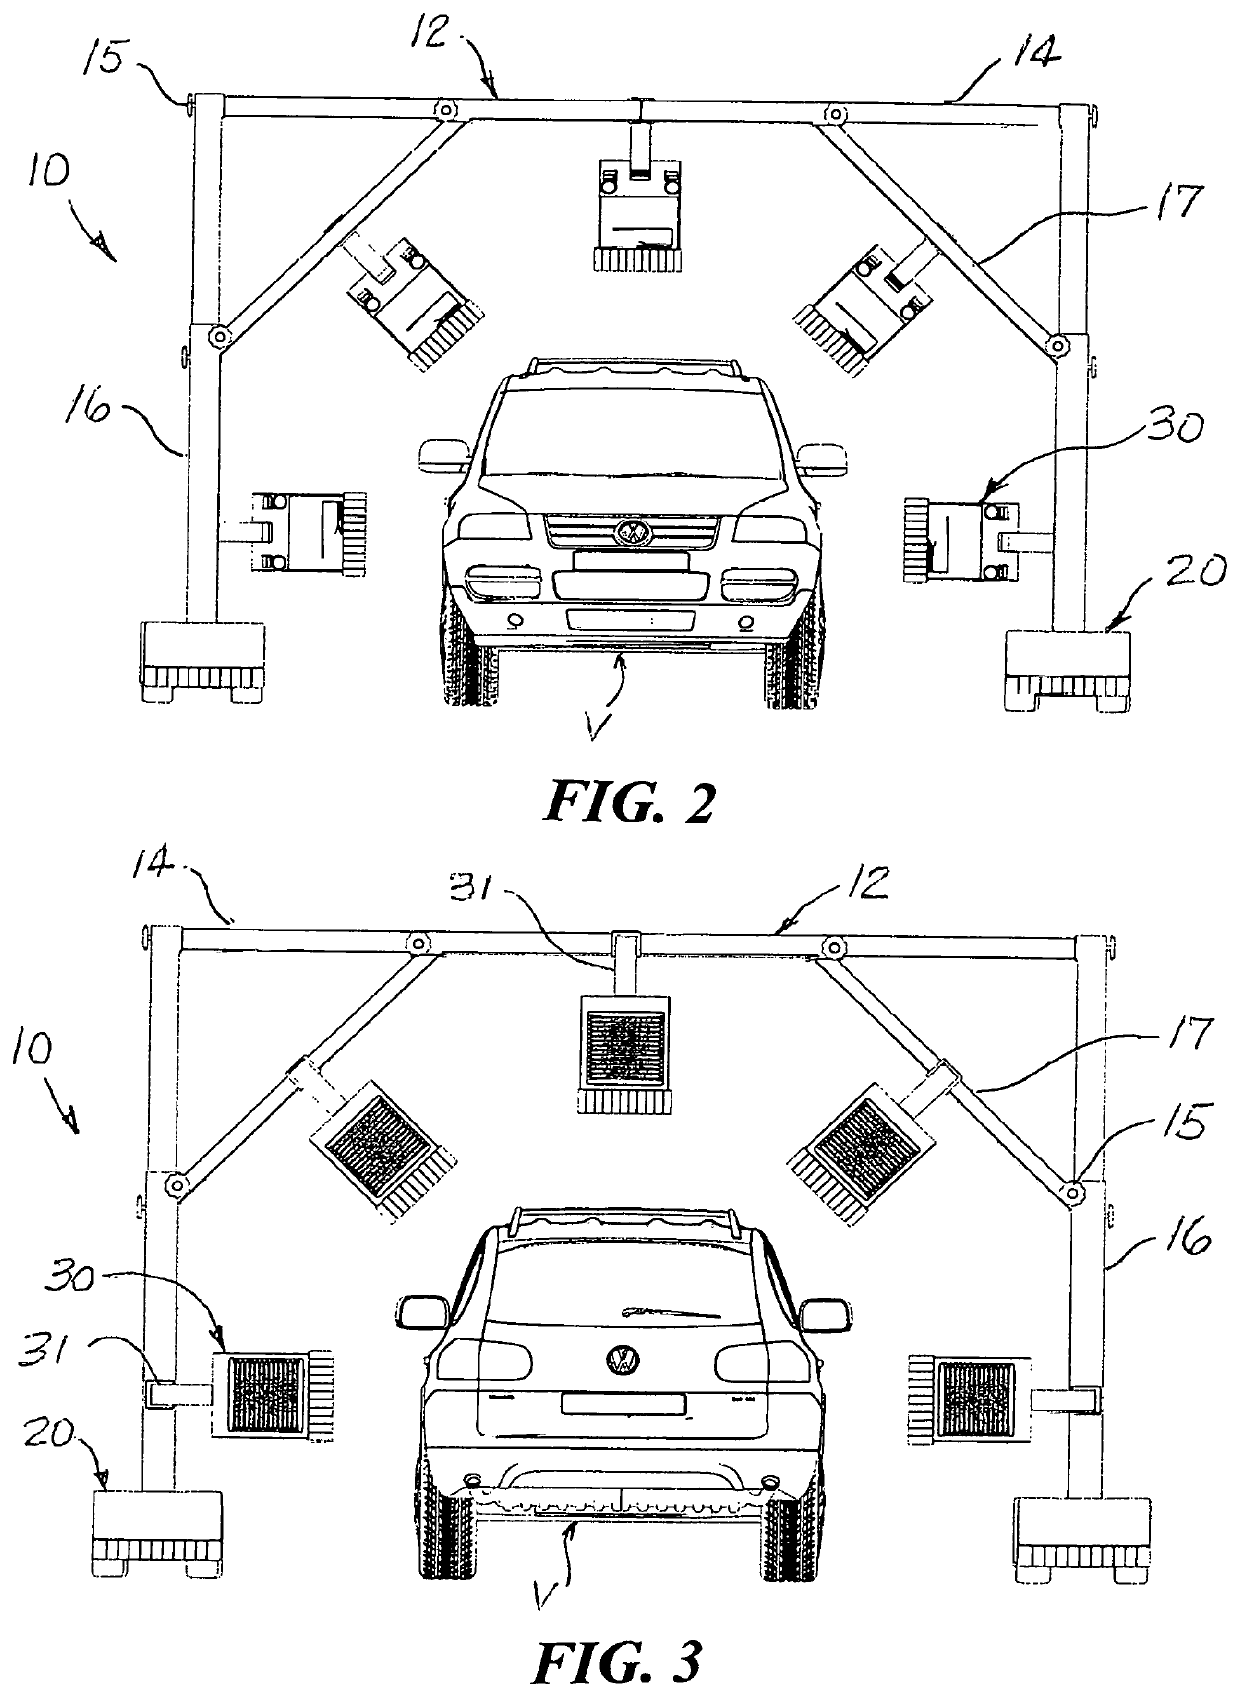 Vehicle surface scanning system